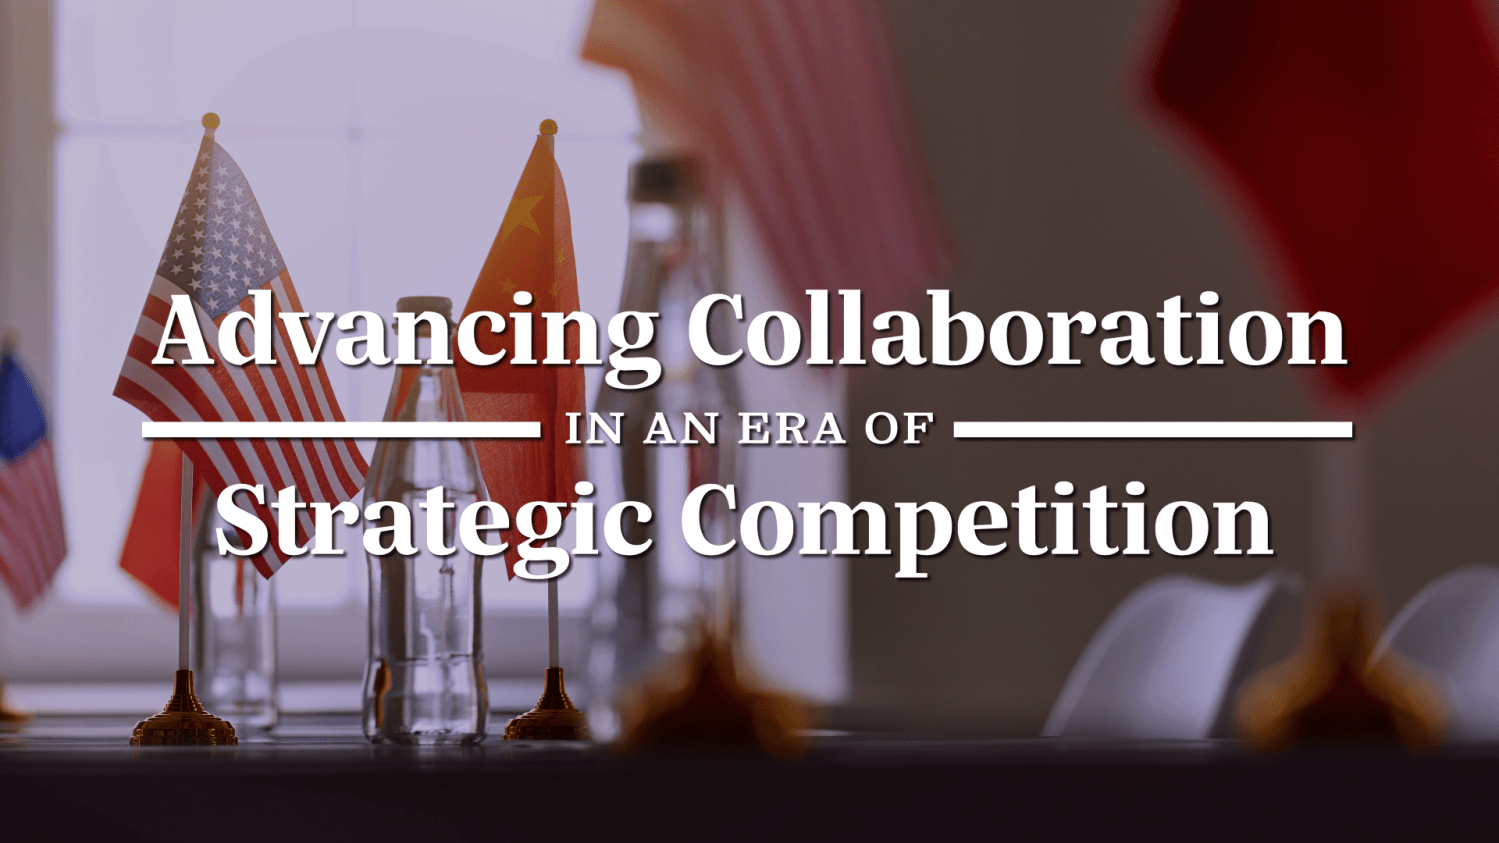 Advancing Collaboration in an Era of Strategic Competition